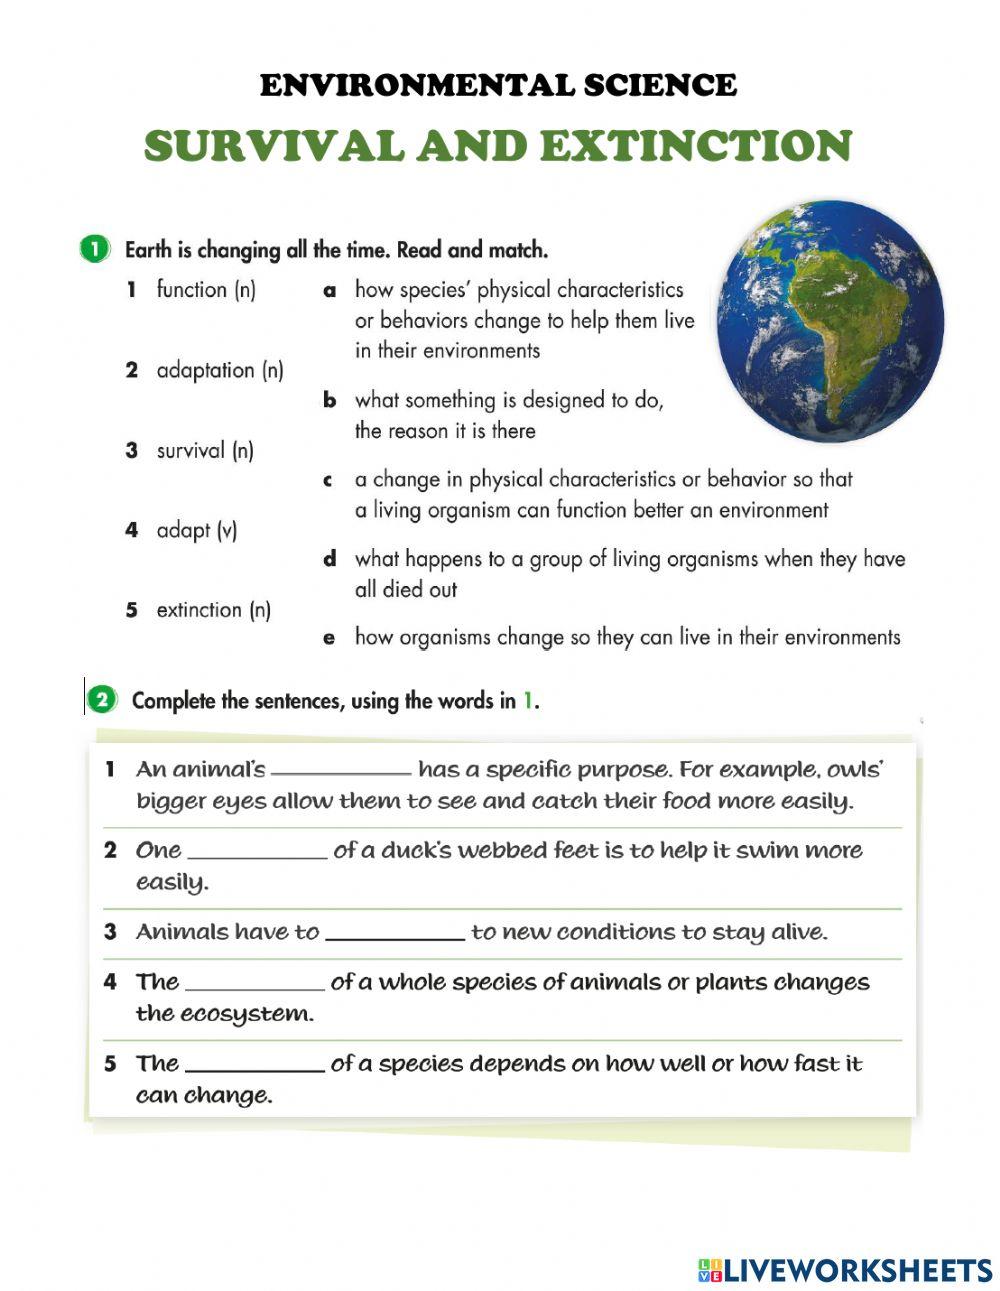 Survival and extinction